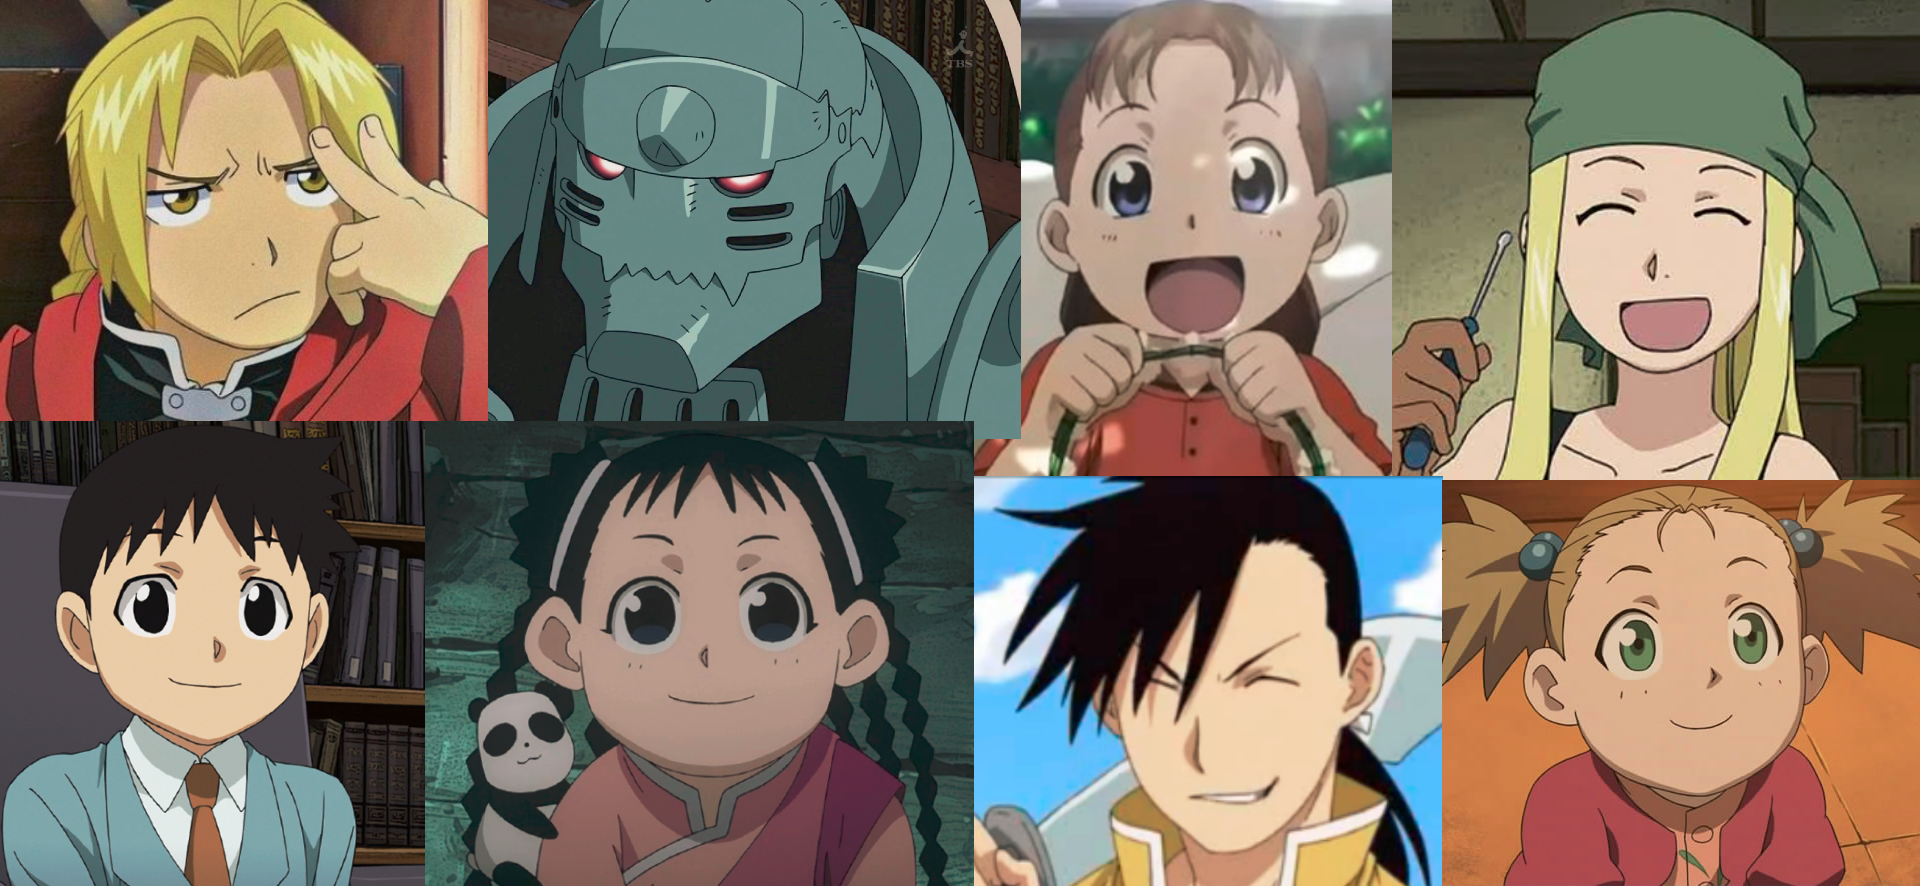 A collection of headshots of the child characters of Fullmetal Alchemist.